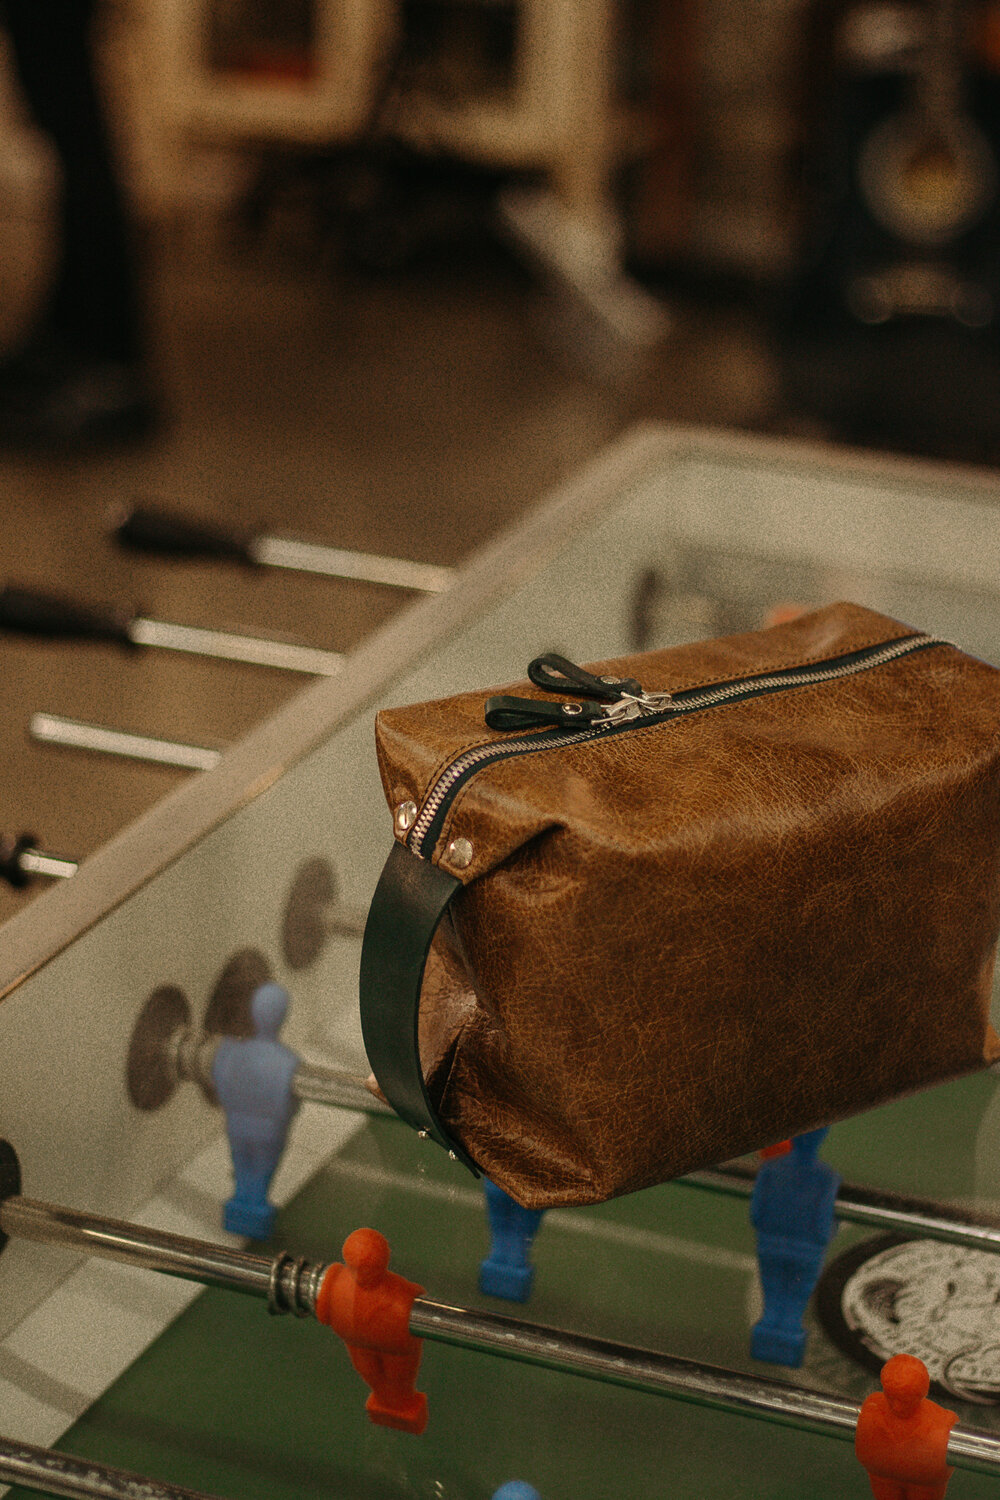 A Large Toiletry Bag Travel Mate sitting on top of a foosball table.